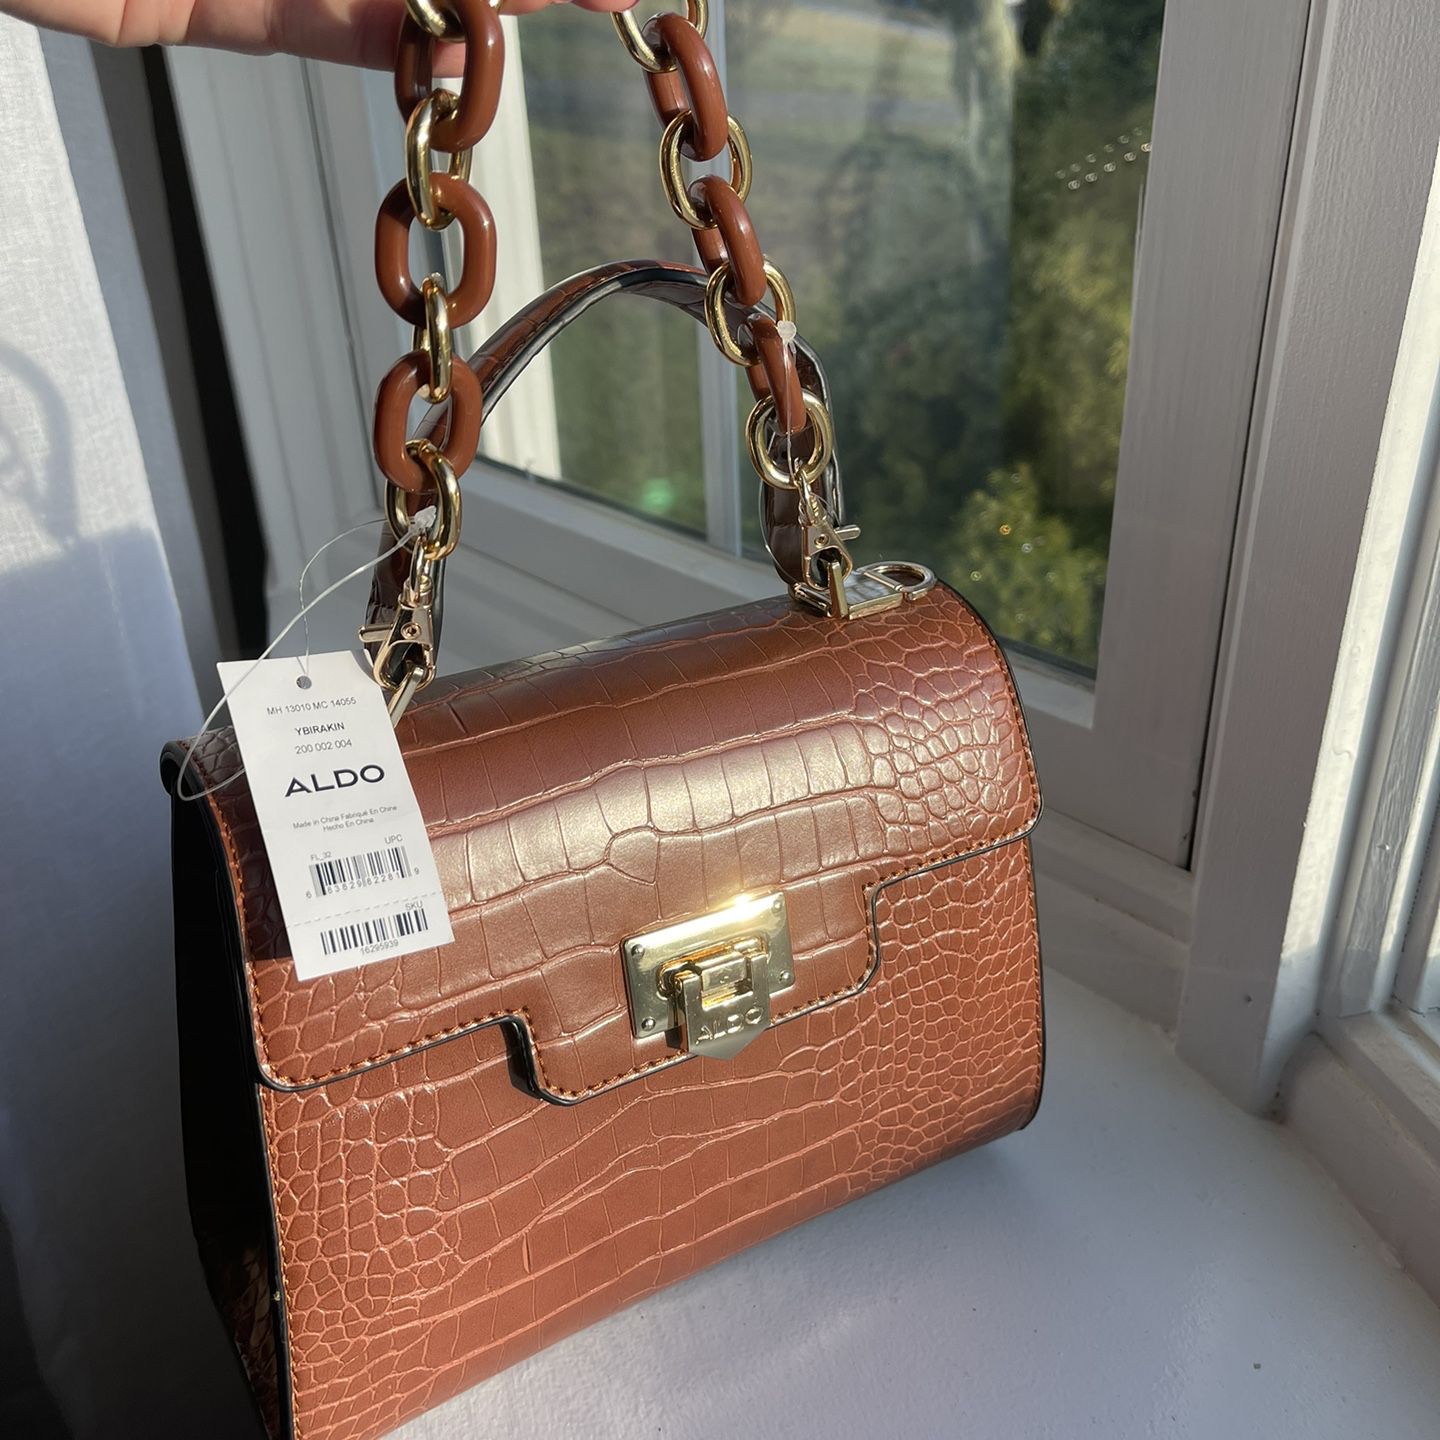 Aldo bags for Sale in Queens, NY - OfferUp